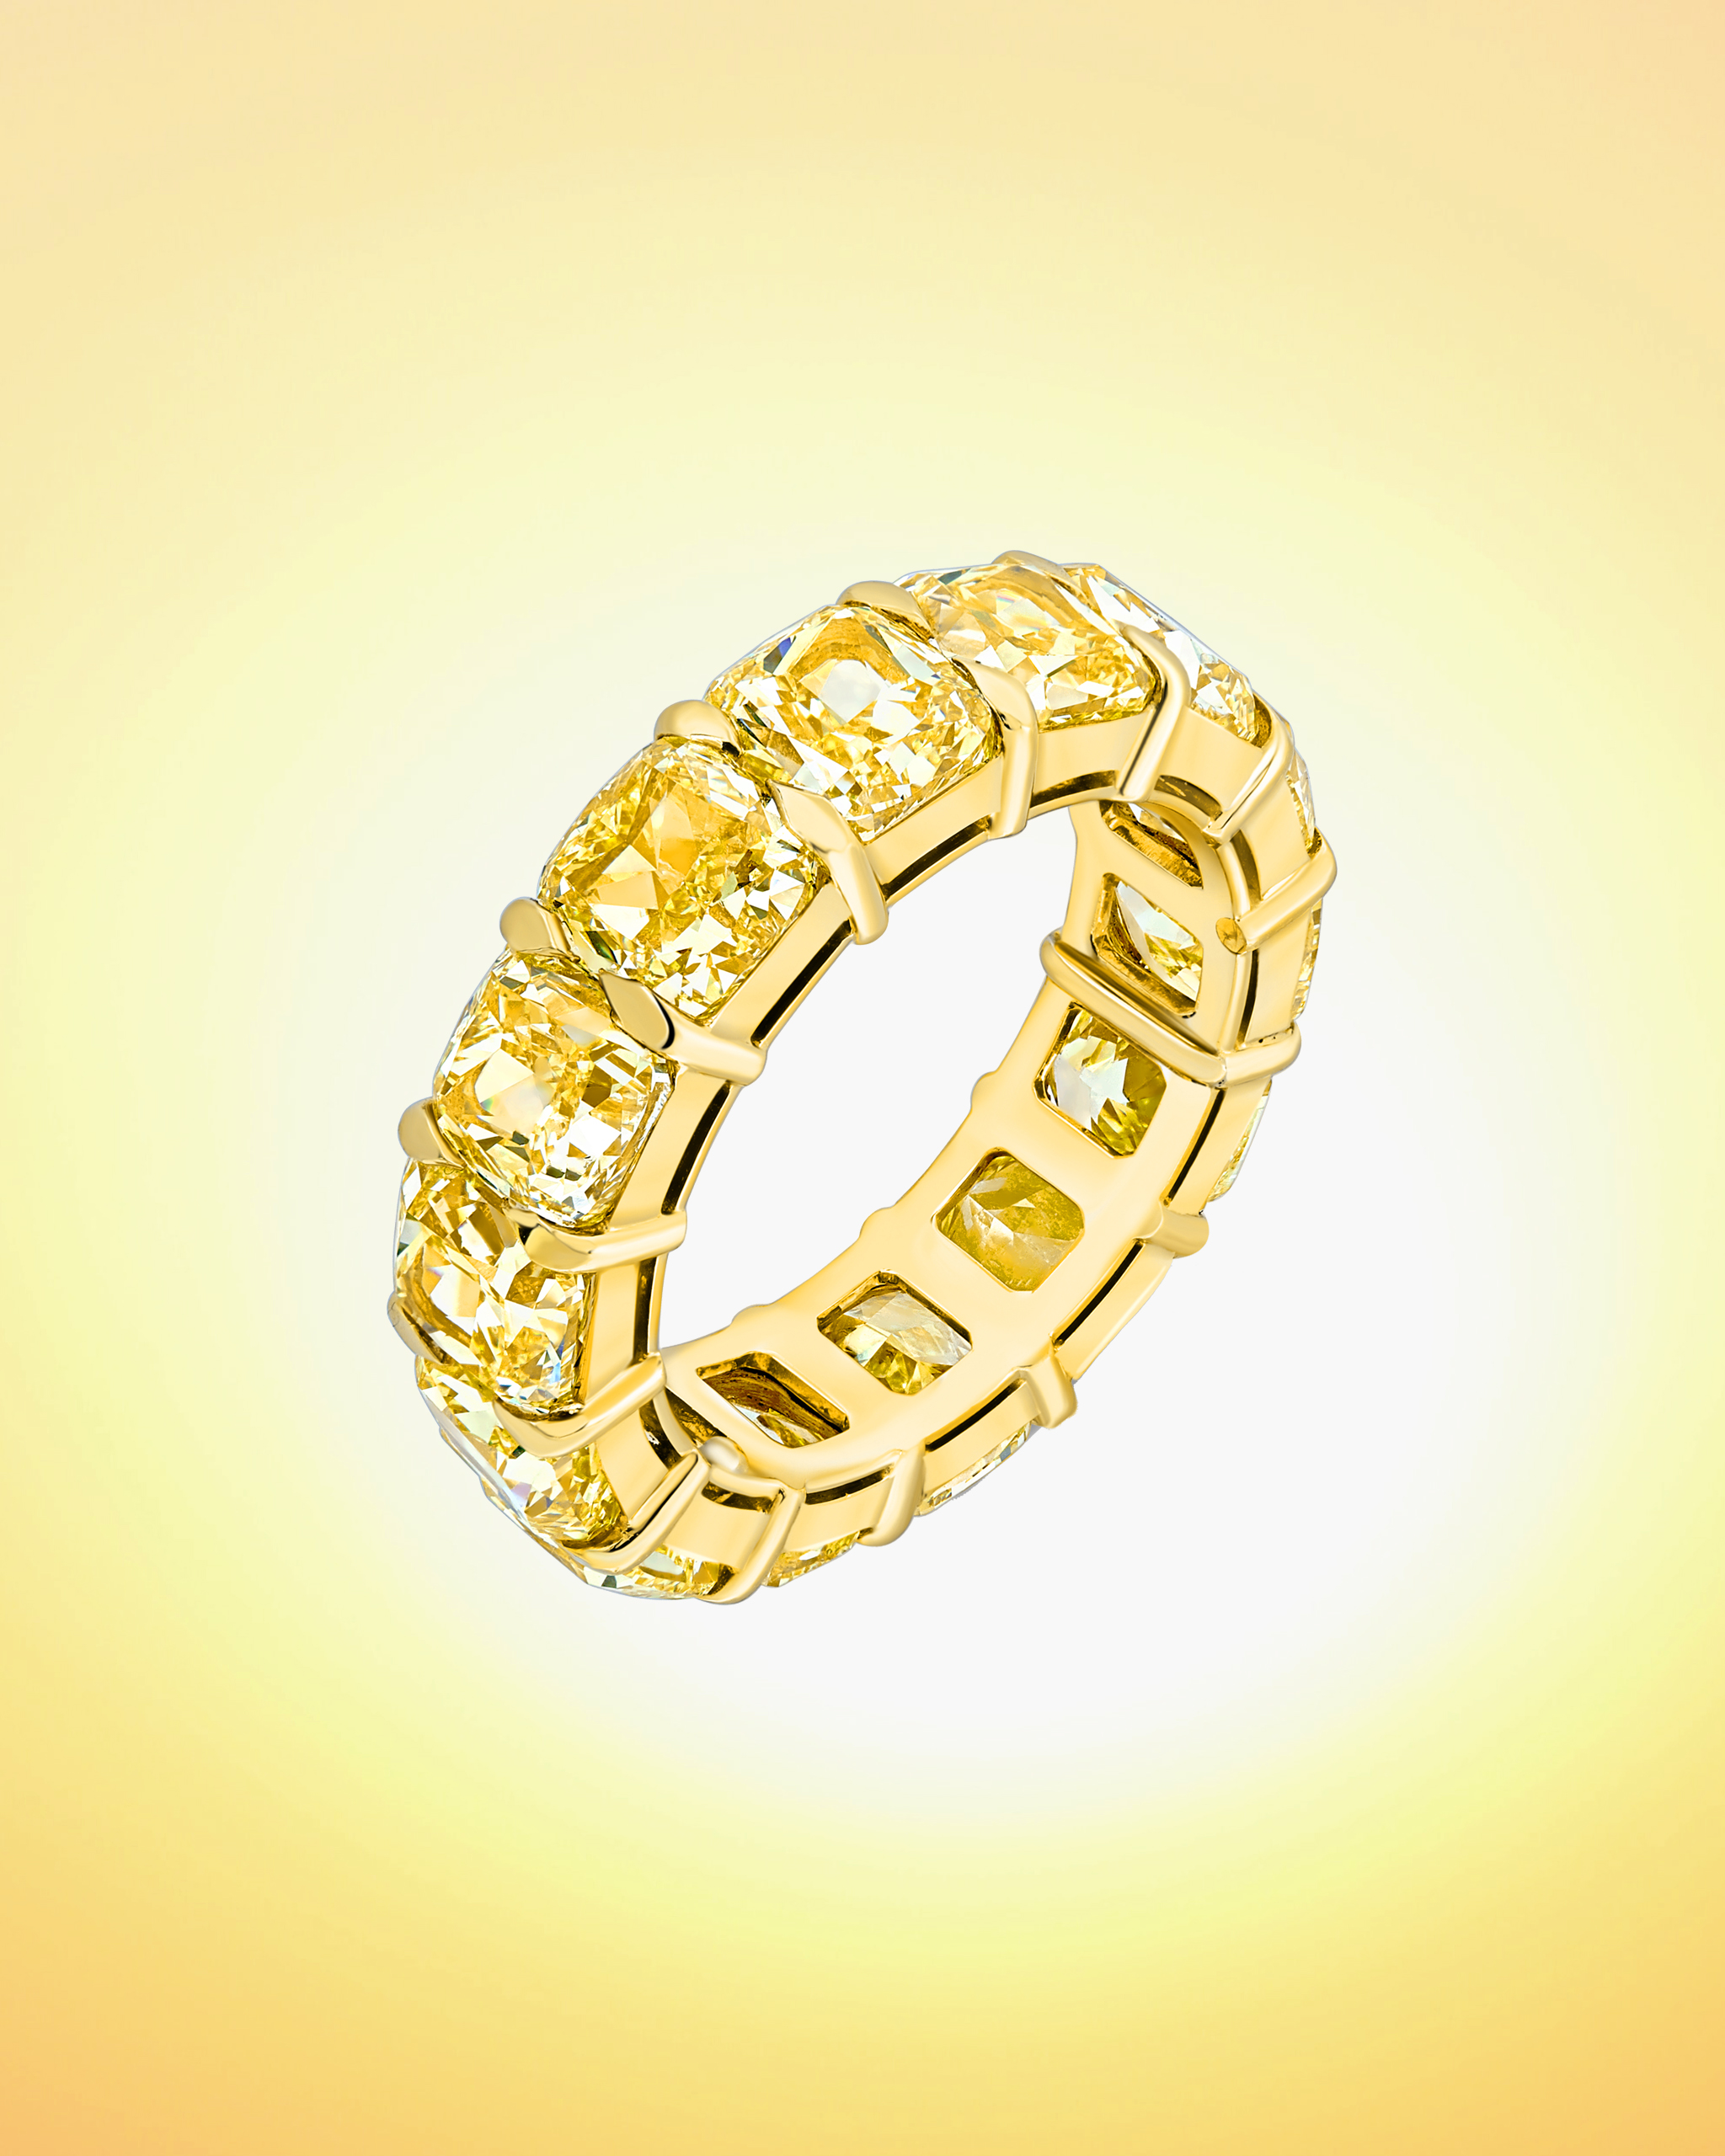 Fancy cut yellow diamond ring in the eternity ring style on a yellow gold band by David Morris